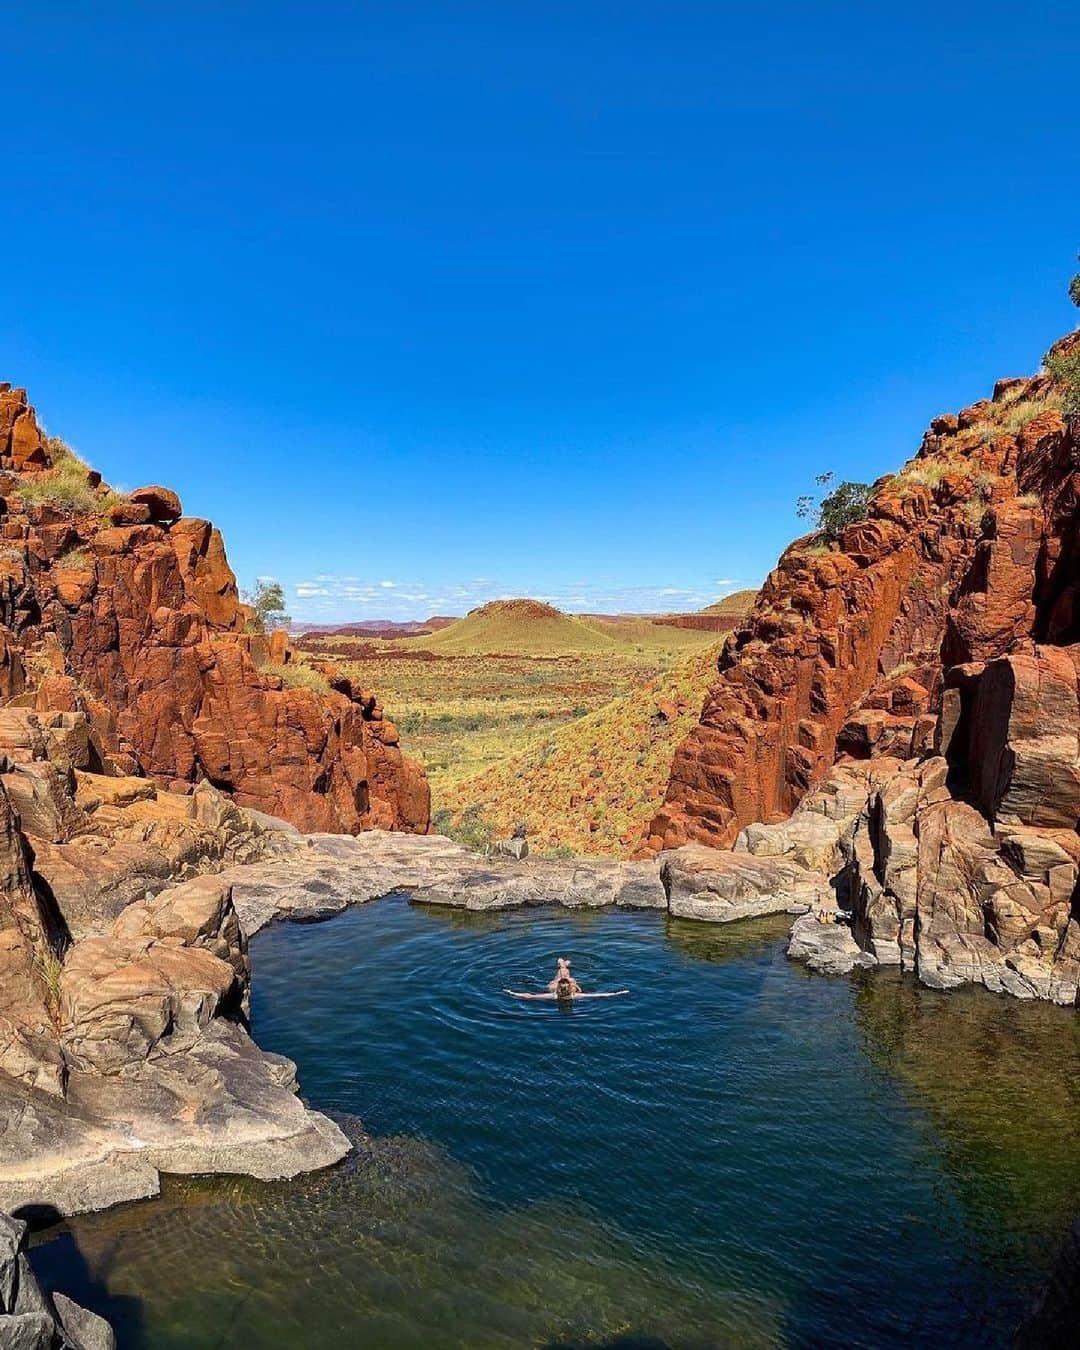 Australiaのインスタグラム：「@australiasnorthwest is a pretty great spot to put your feet up if you ask us 🤷 Within #MillstreamChichesterNationalPark, on the lands of the Yinjibarndi people, you'll find stunning spots like #PythonPool, where rugged red rocks frame beautifully untamed landscapes 💚 Starting from #Karratha in the #Pilbara region, step into the wilds of this epic part of @westernaustralia on a 4WD camping adventure with @ngurrangga_tours 🚙🏕️ Explore ancient rock art, forage for bush foods and hear local stories as you tag along with Traditional Custodians (📸: @travellinwa).   #SeeAustralia #ComeAndSayGday #WATheDreamState #AustraliasNorthWest  ID: A person floating on their back in a tranquil pool surrounded by red, rocky cliffs while overlooking a rugged green expanse on a sunny day.」